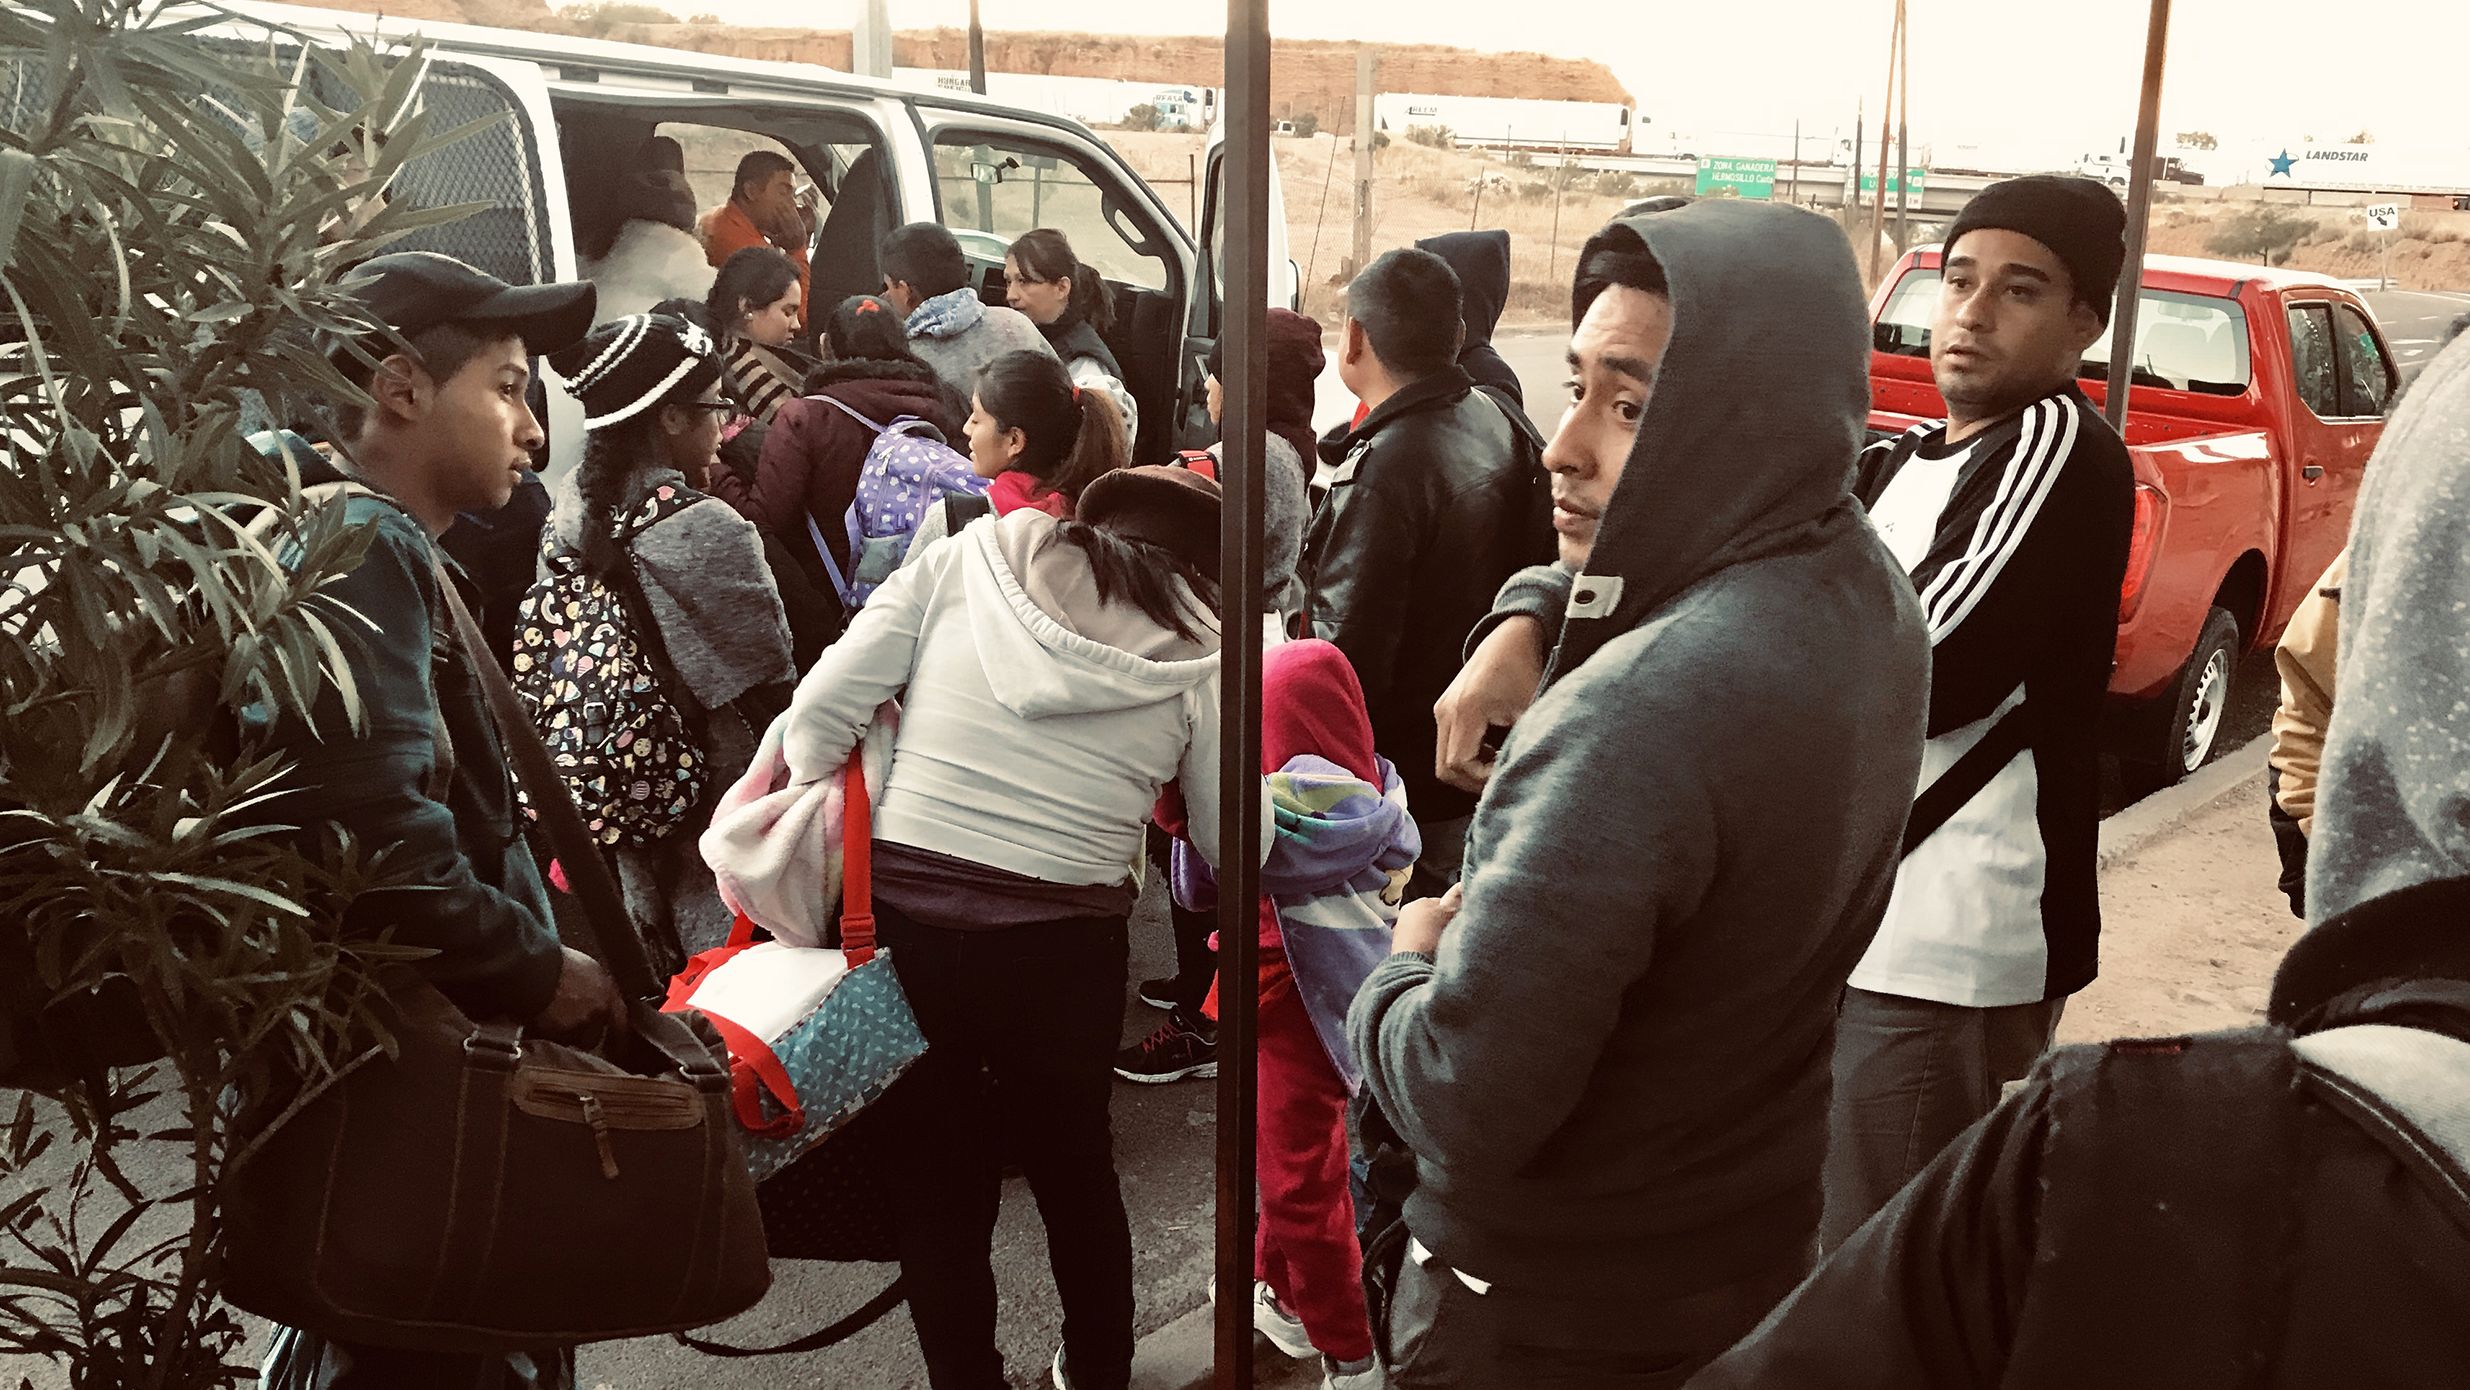 Asylum seekers boarded a van to a migrant shelter in Nogales on the Mexican side of the border. They had been waiting from a day to two weeks to apply for asylum at the US port of entry in Nogales, Arizona.